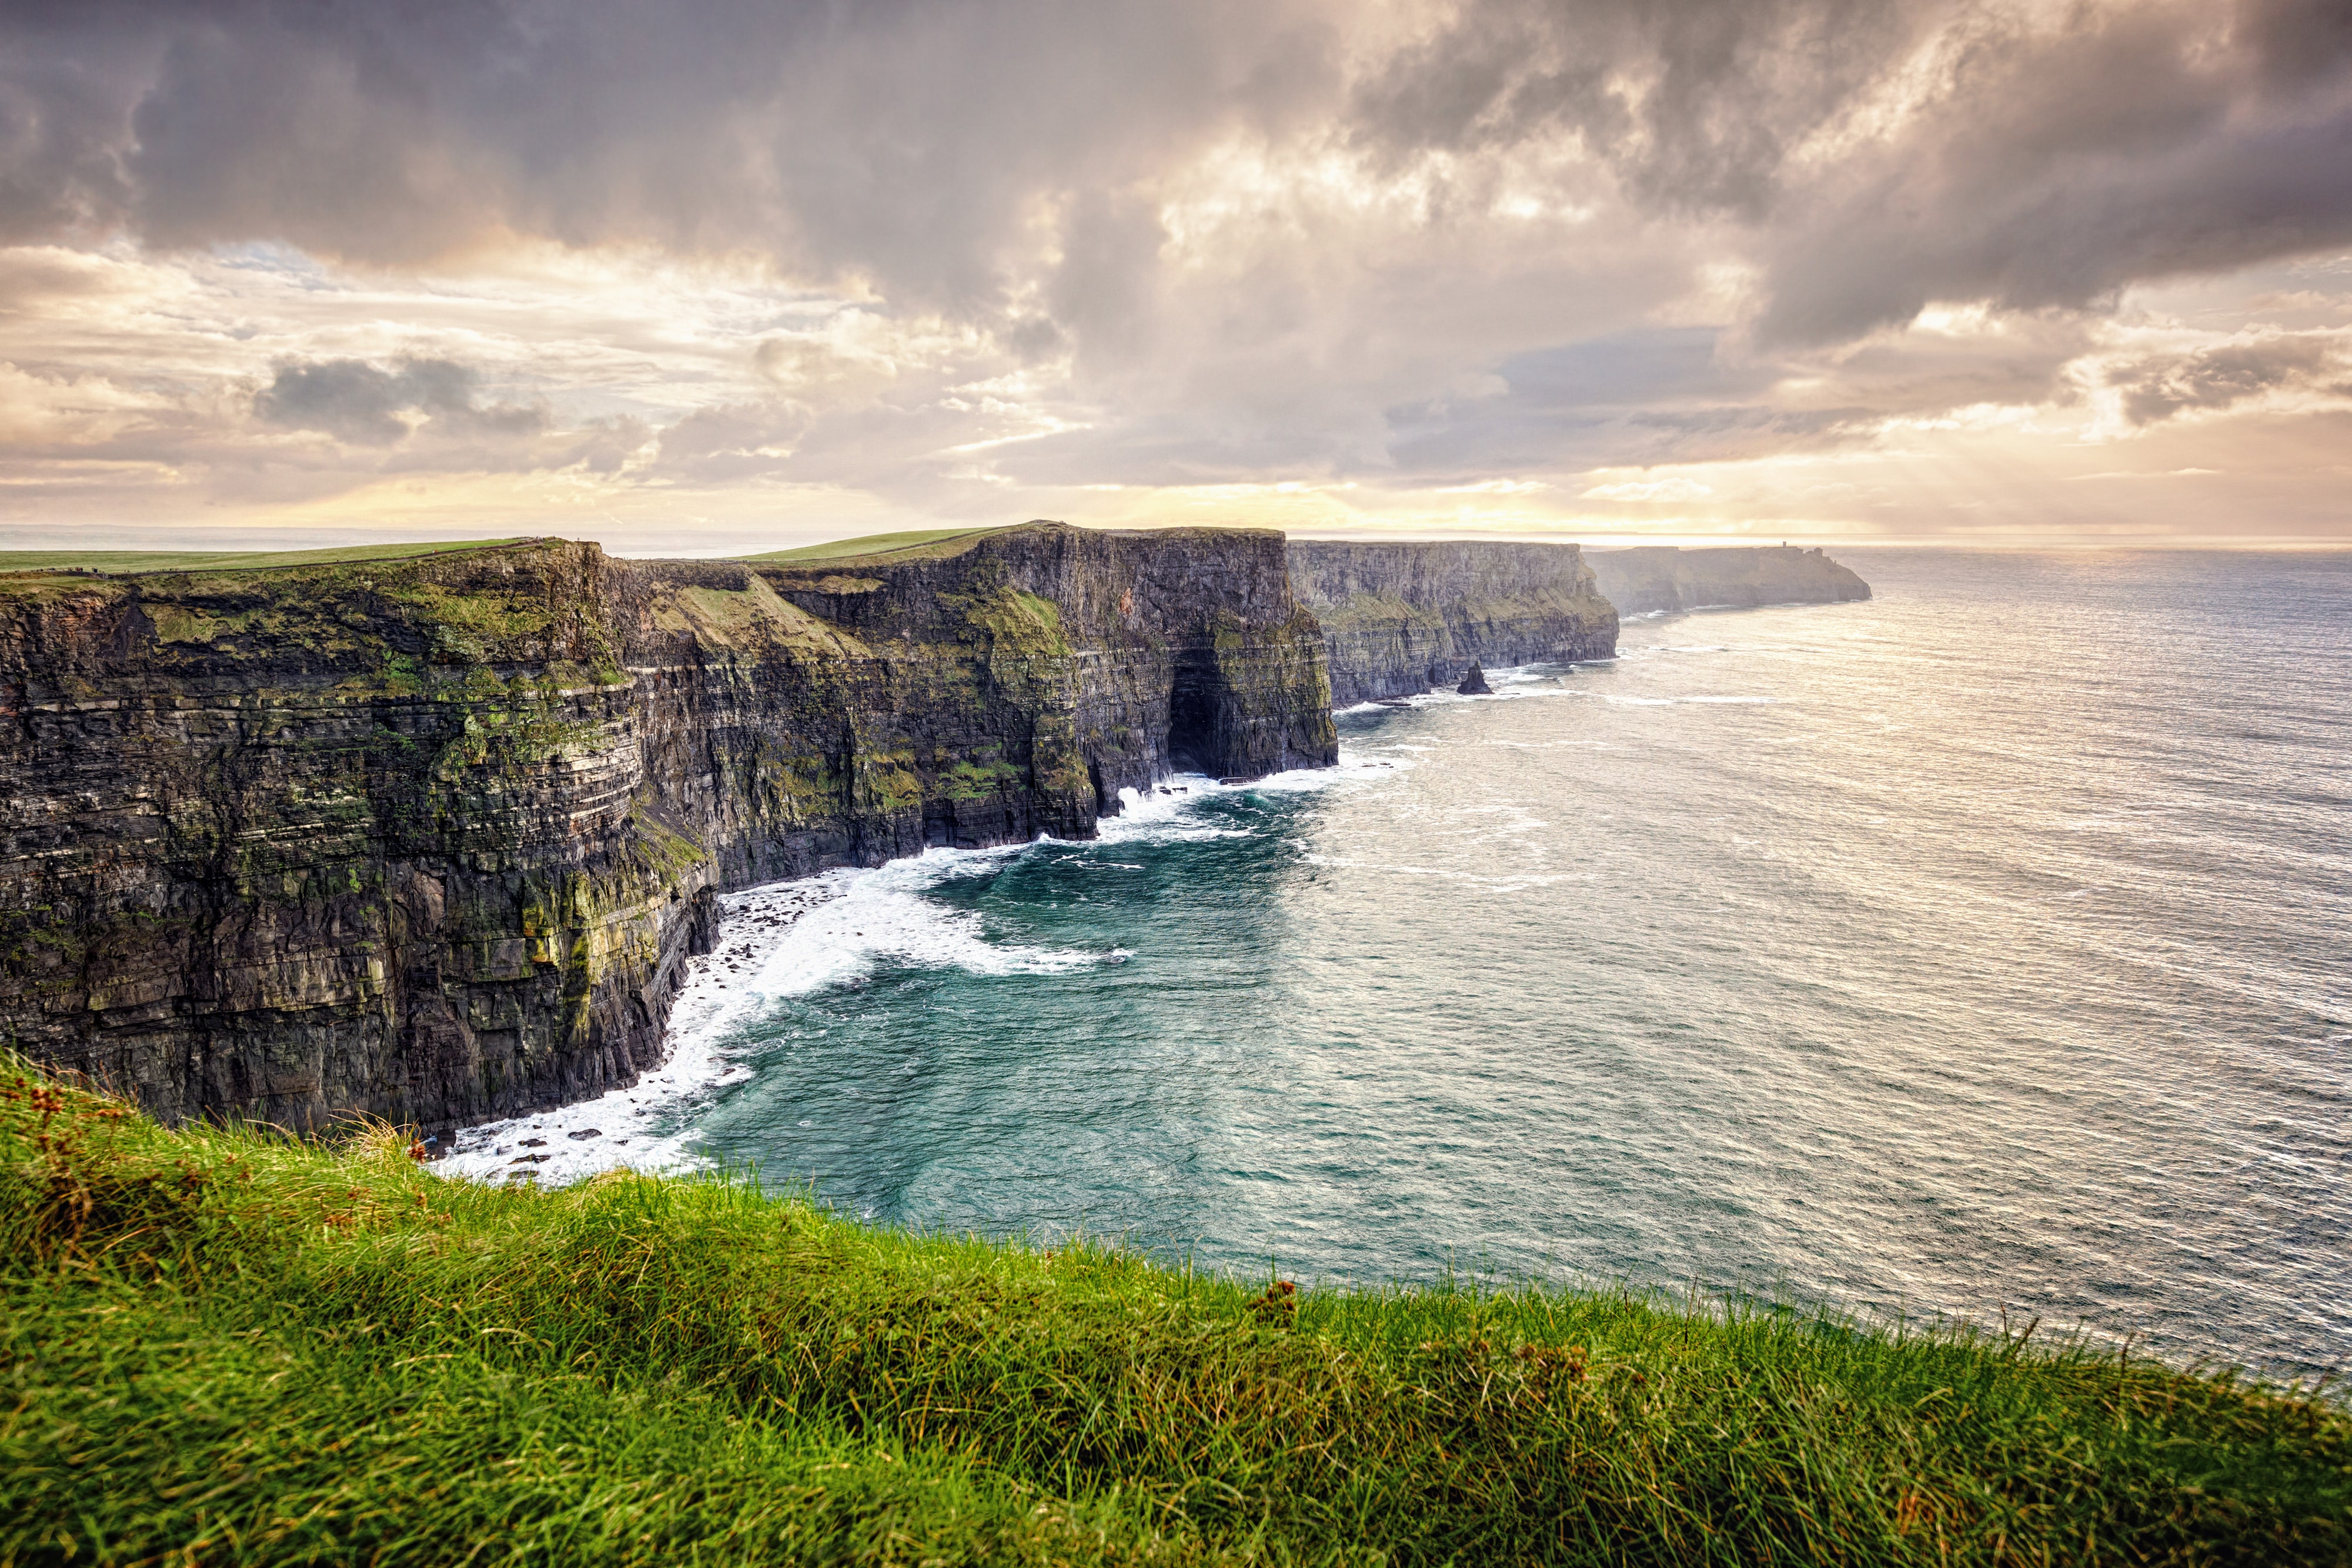 Few places exemplify the raw, untamed beauty of Ireland’s west coast like this natural wonder, which tops 702 feet at the highest point. And while you might know them better as the <a href="https://www.youtube.com/watch?v=Urhw_kPDkoo&feature=youtu.be">Cliffs of Insanity</a> from <em>The Princess Bride</em>, in reality, the cliffs are located just south of Galway.<p>Sign up to receive the latest news, expert tips, and inspiration on all things travel</p><a href="https://www.cntraveler.com/newsletter/the-daily?sourceCode=msnsend">Inspire Me</a>